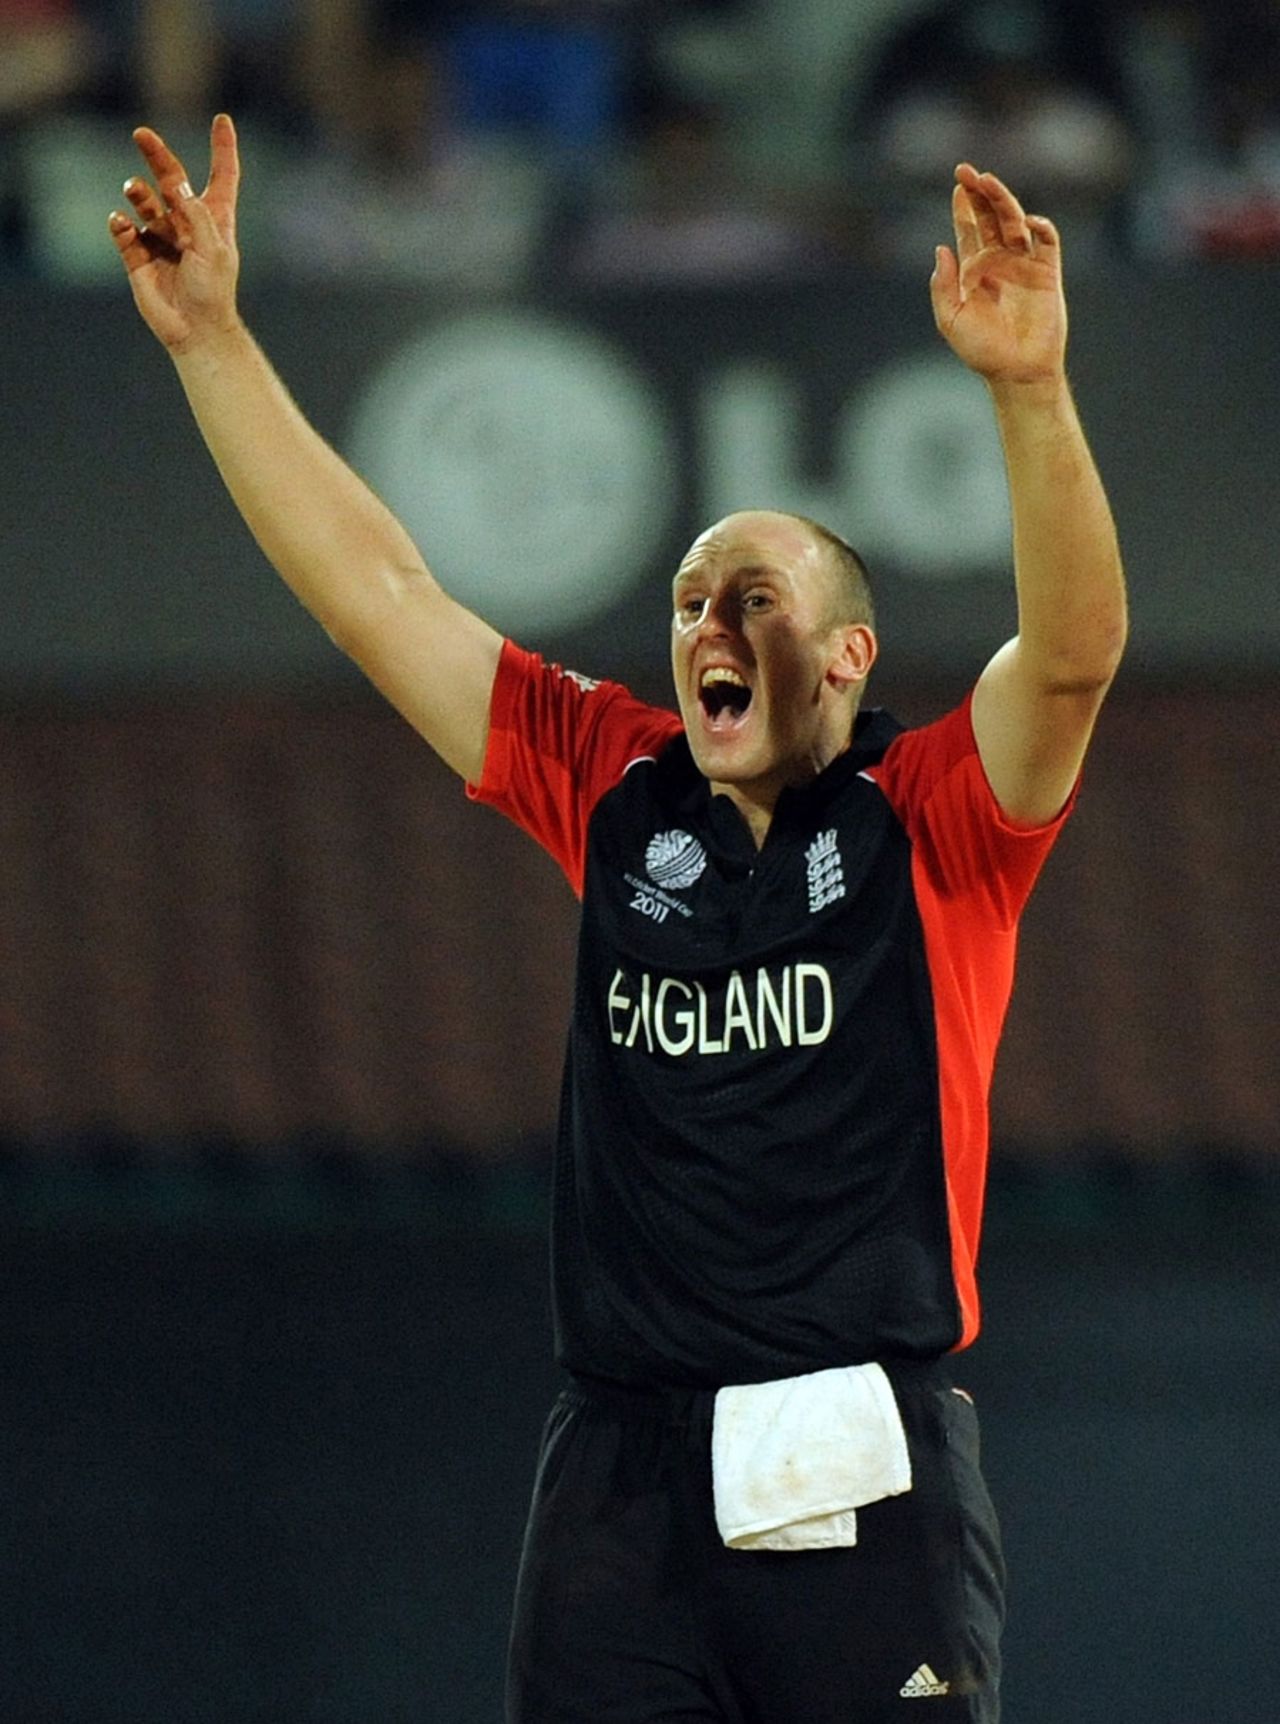 James Tredwell's four wickets took England to a remarkable victory, England v West Indies, World Cup, Group B, March 17, 2011